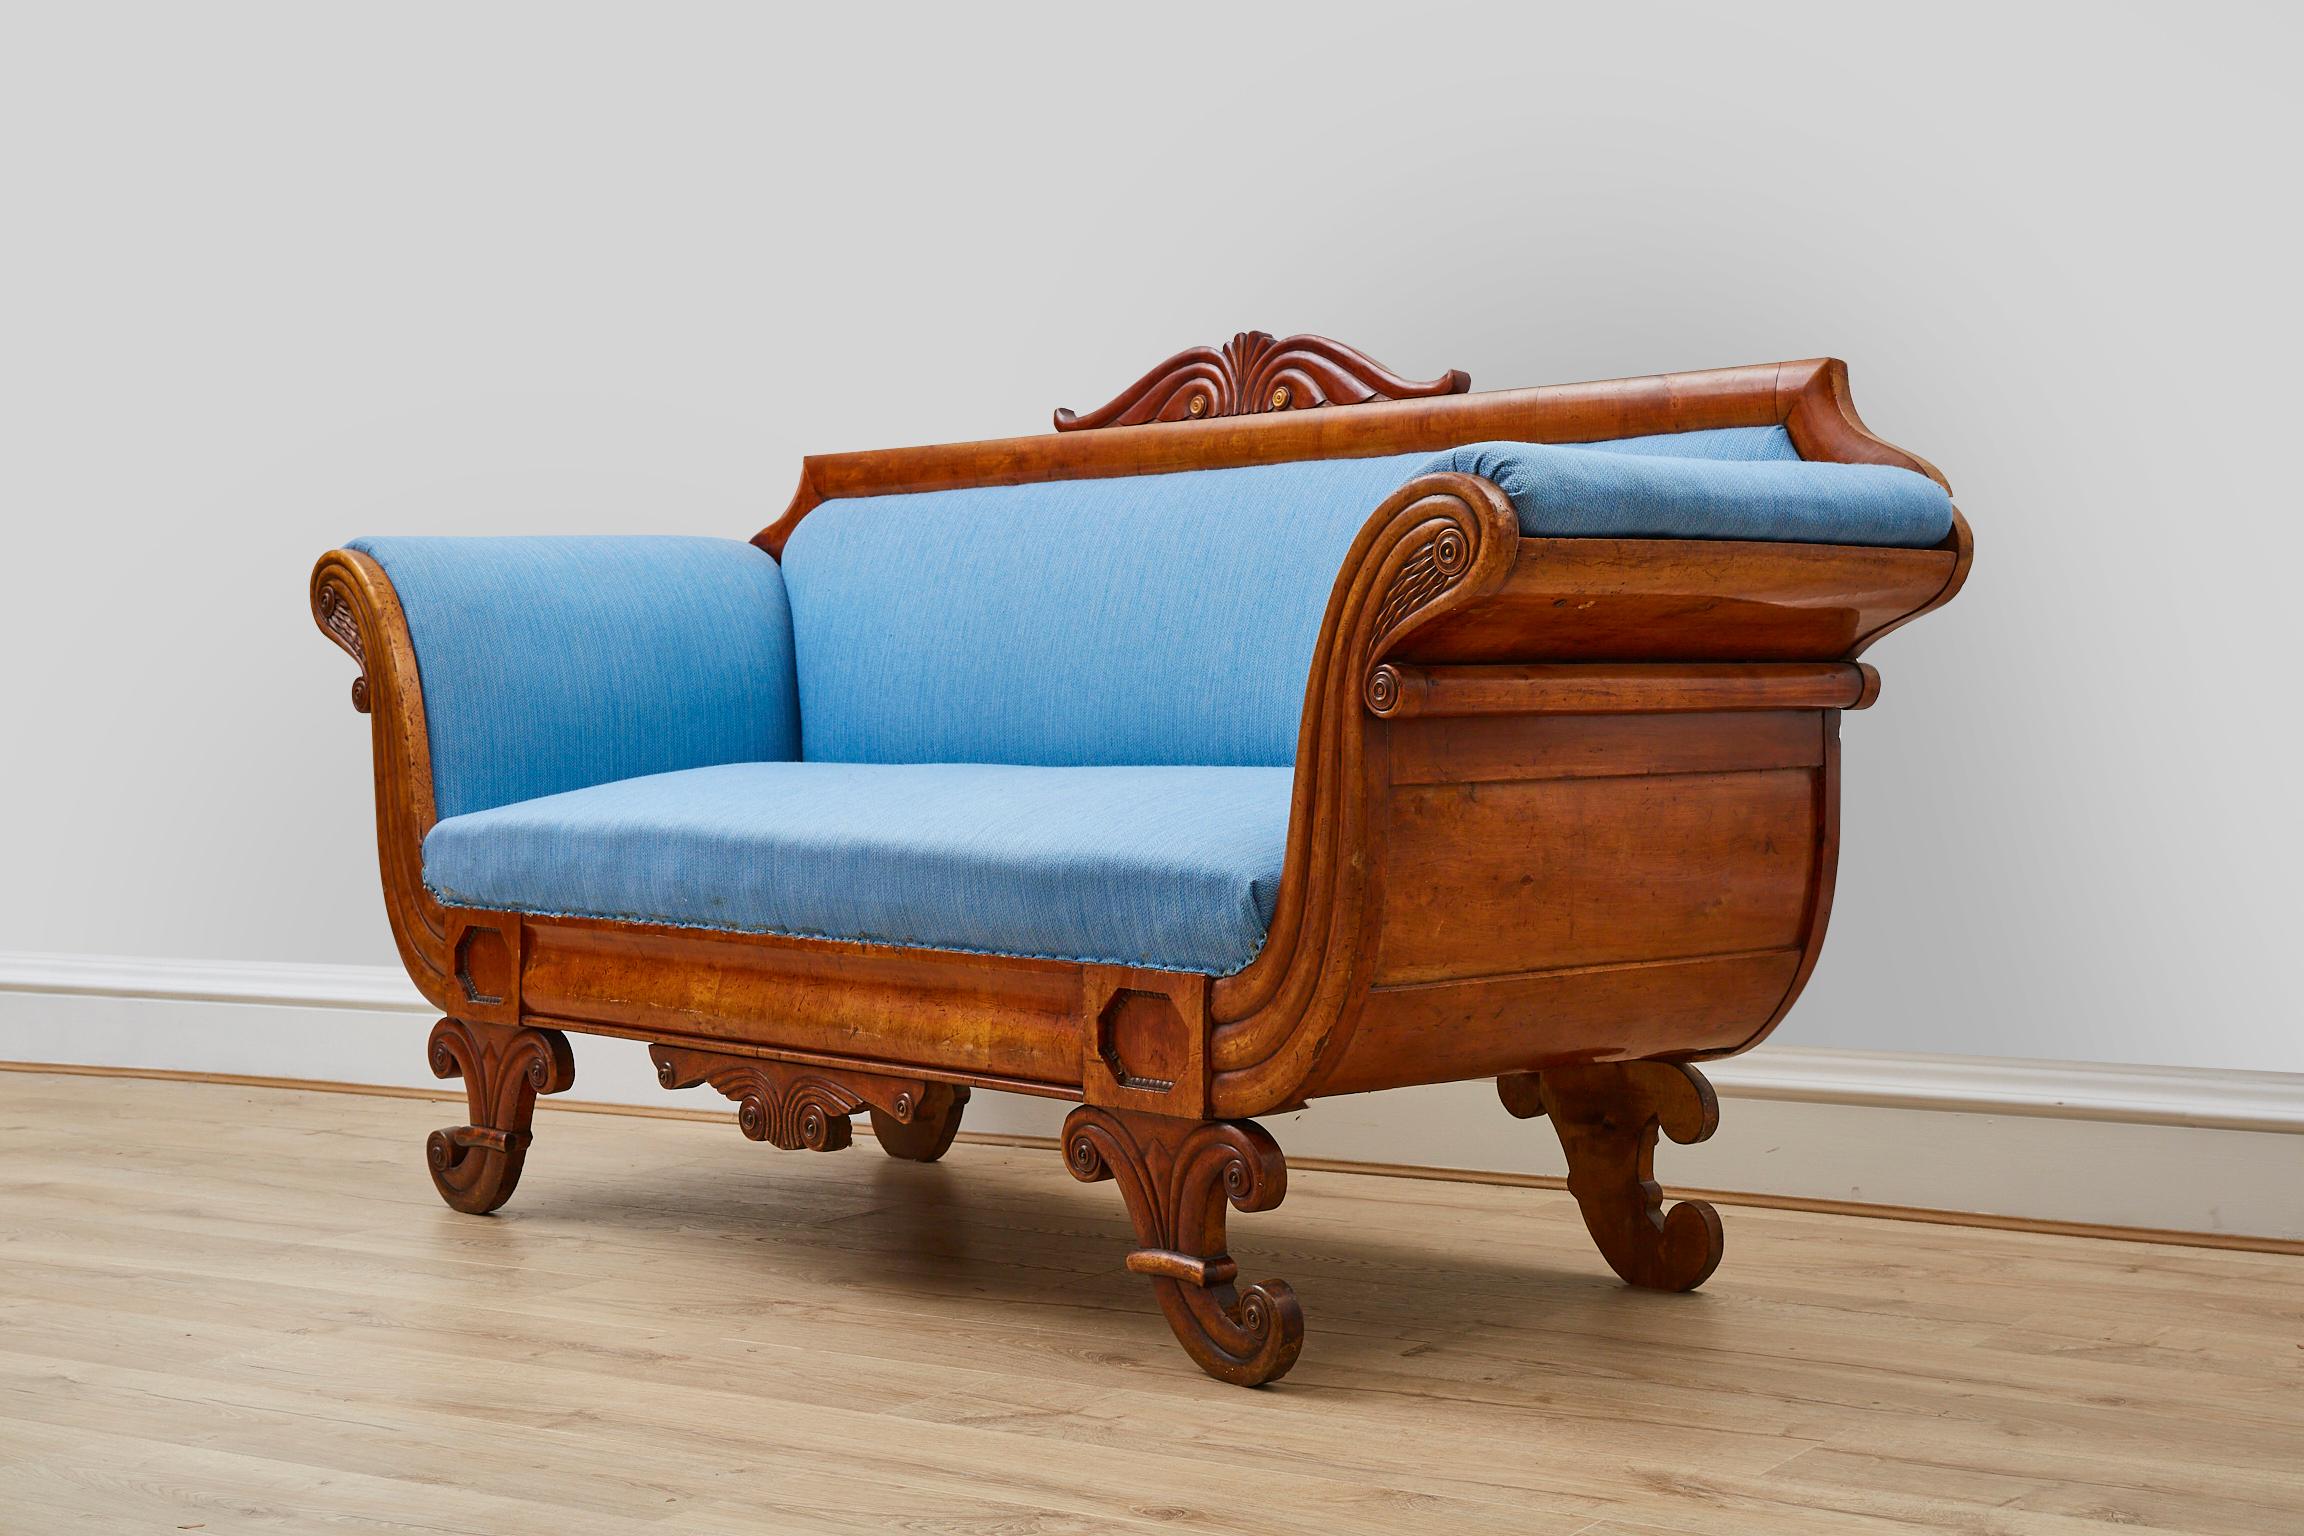 A Viennese Biedermeier sofa from around 1830 is a splendid representation of the Biedermeier style, which was prominent in Central Europe during the early to mid-19th century. These sofas are characterized by their elegant simplicity, refined